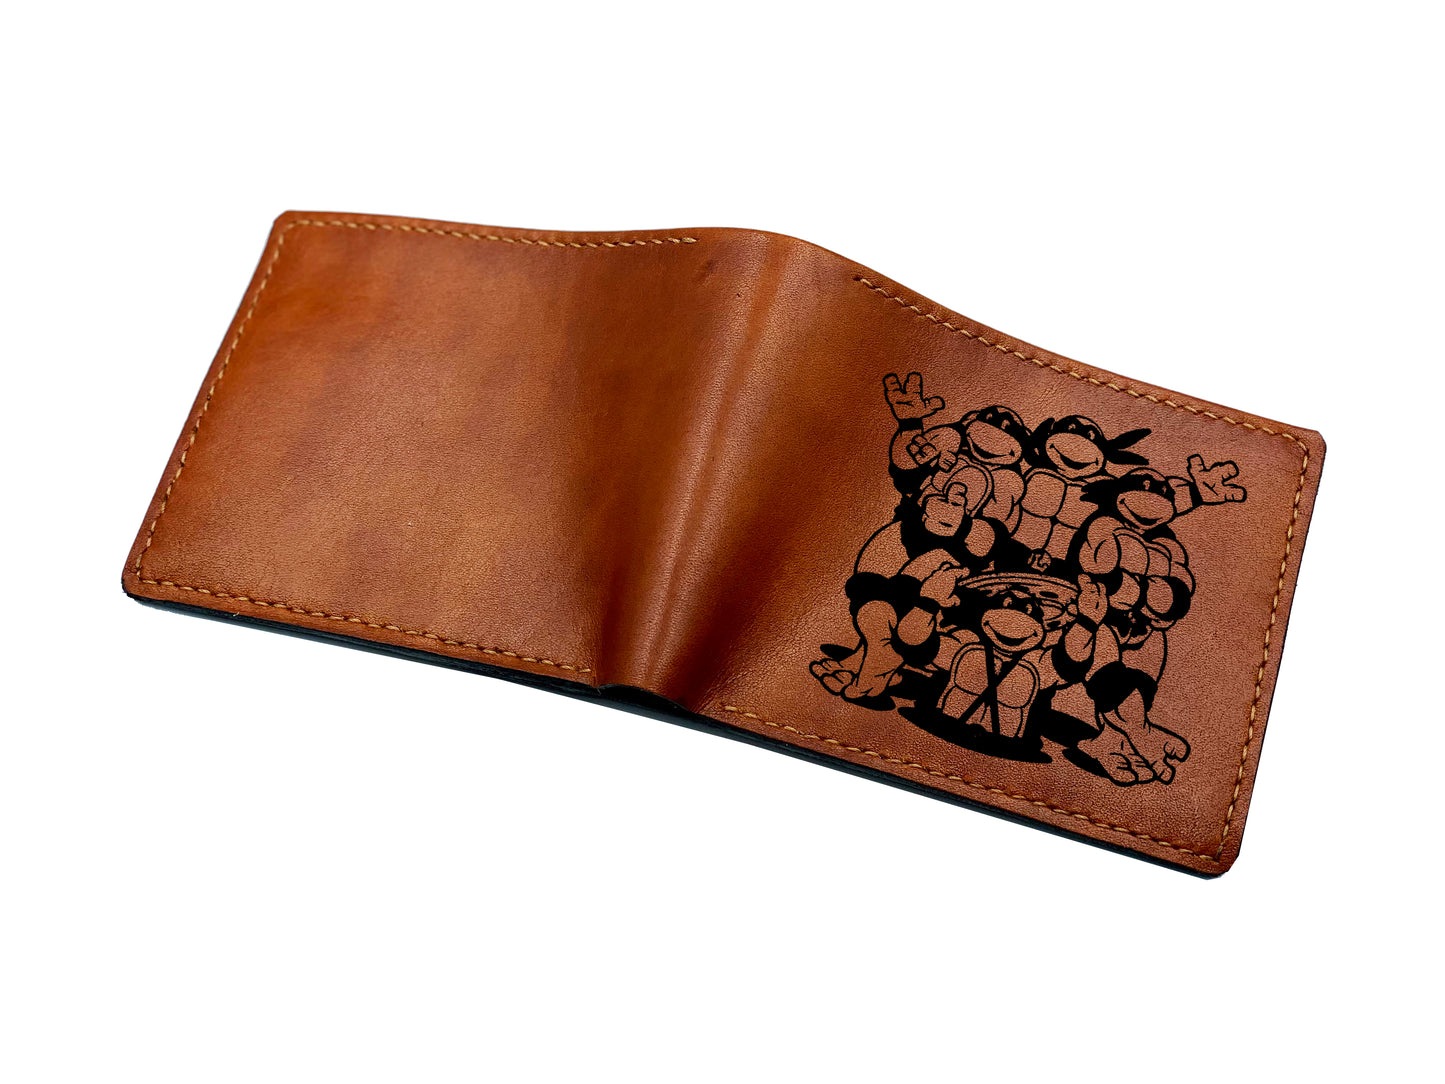 Mayan Corner - Personalized genuine leather handmade wallet, leather gift ideas for him, ninja turtle leather art wallet - 0111221